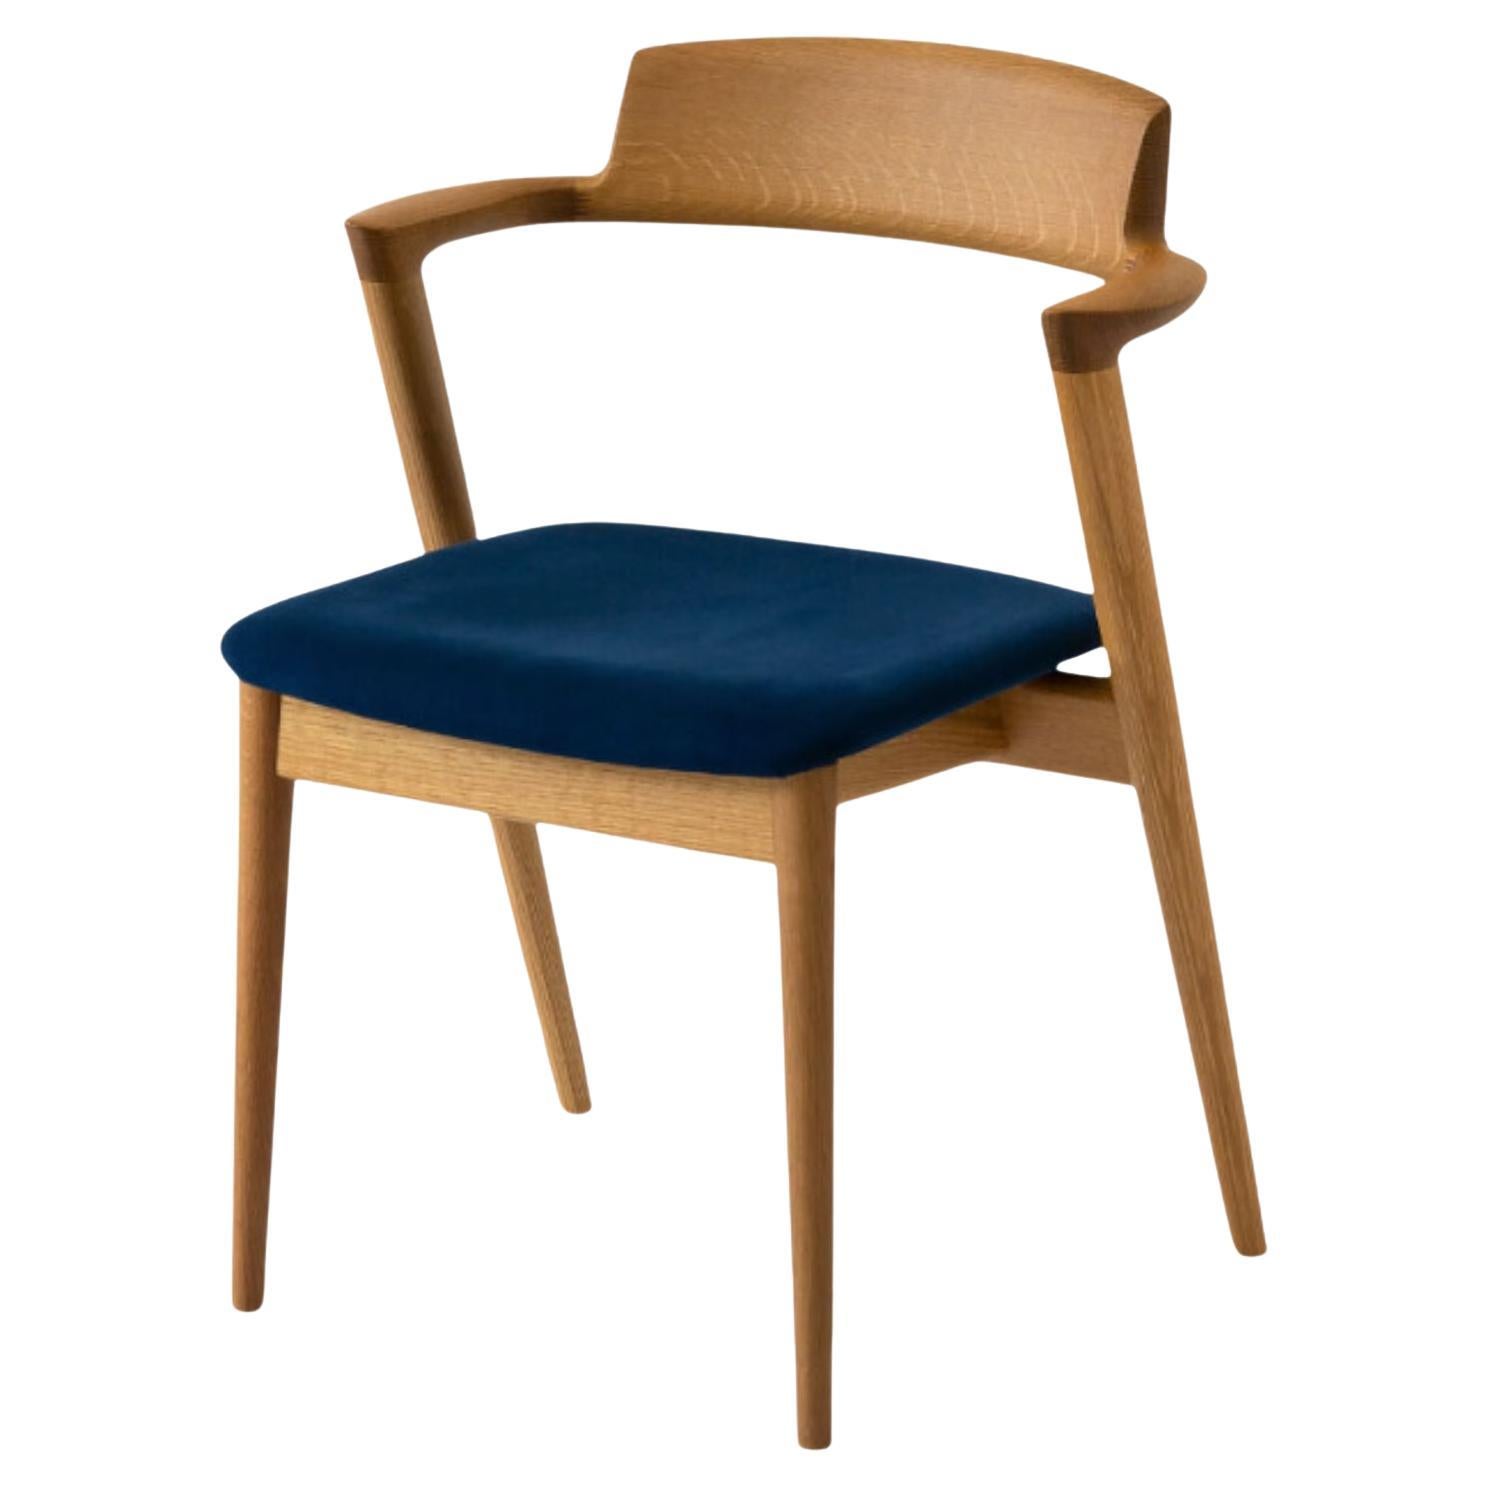 Motomi Kawakami 'Seoto KD20' Semi-Arm Upholstered Beech Dining Chair for Hida In New Condition For Sale In Glendale, CA